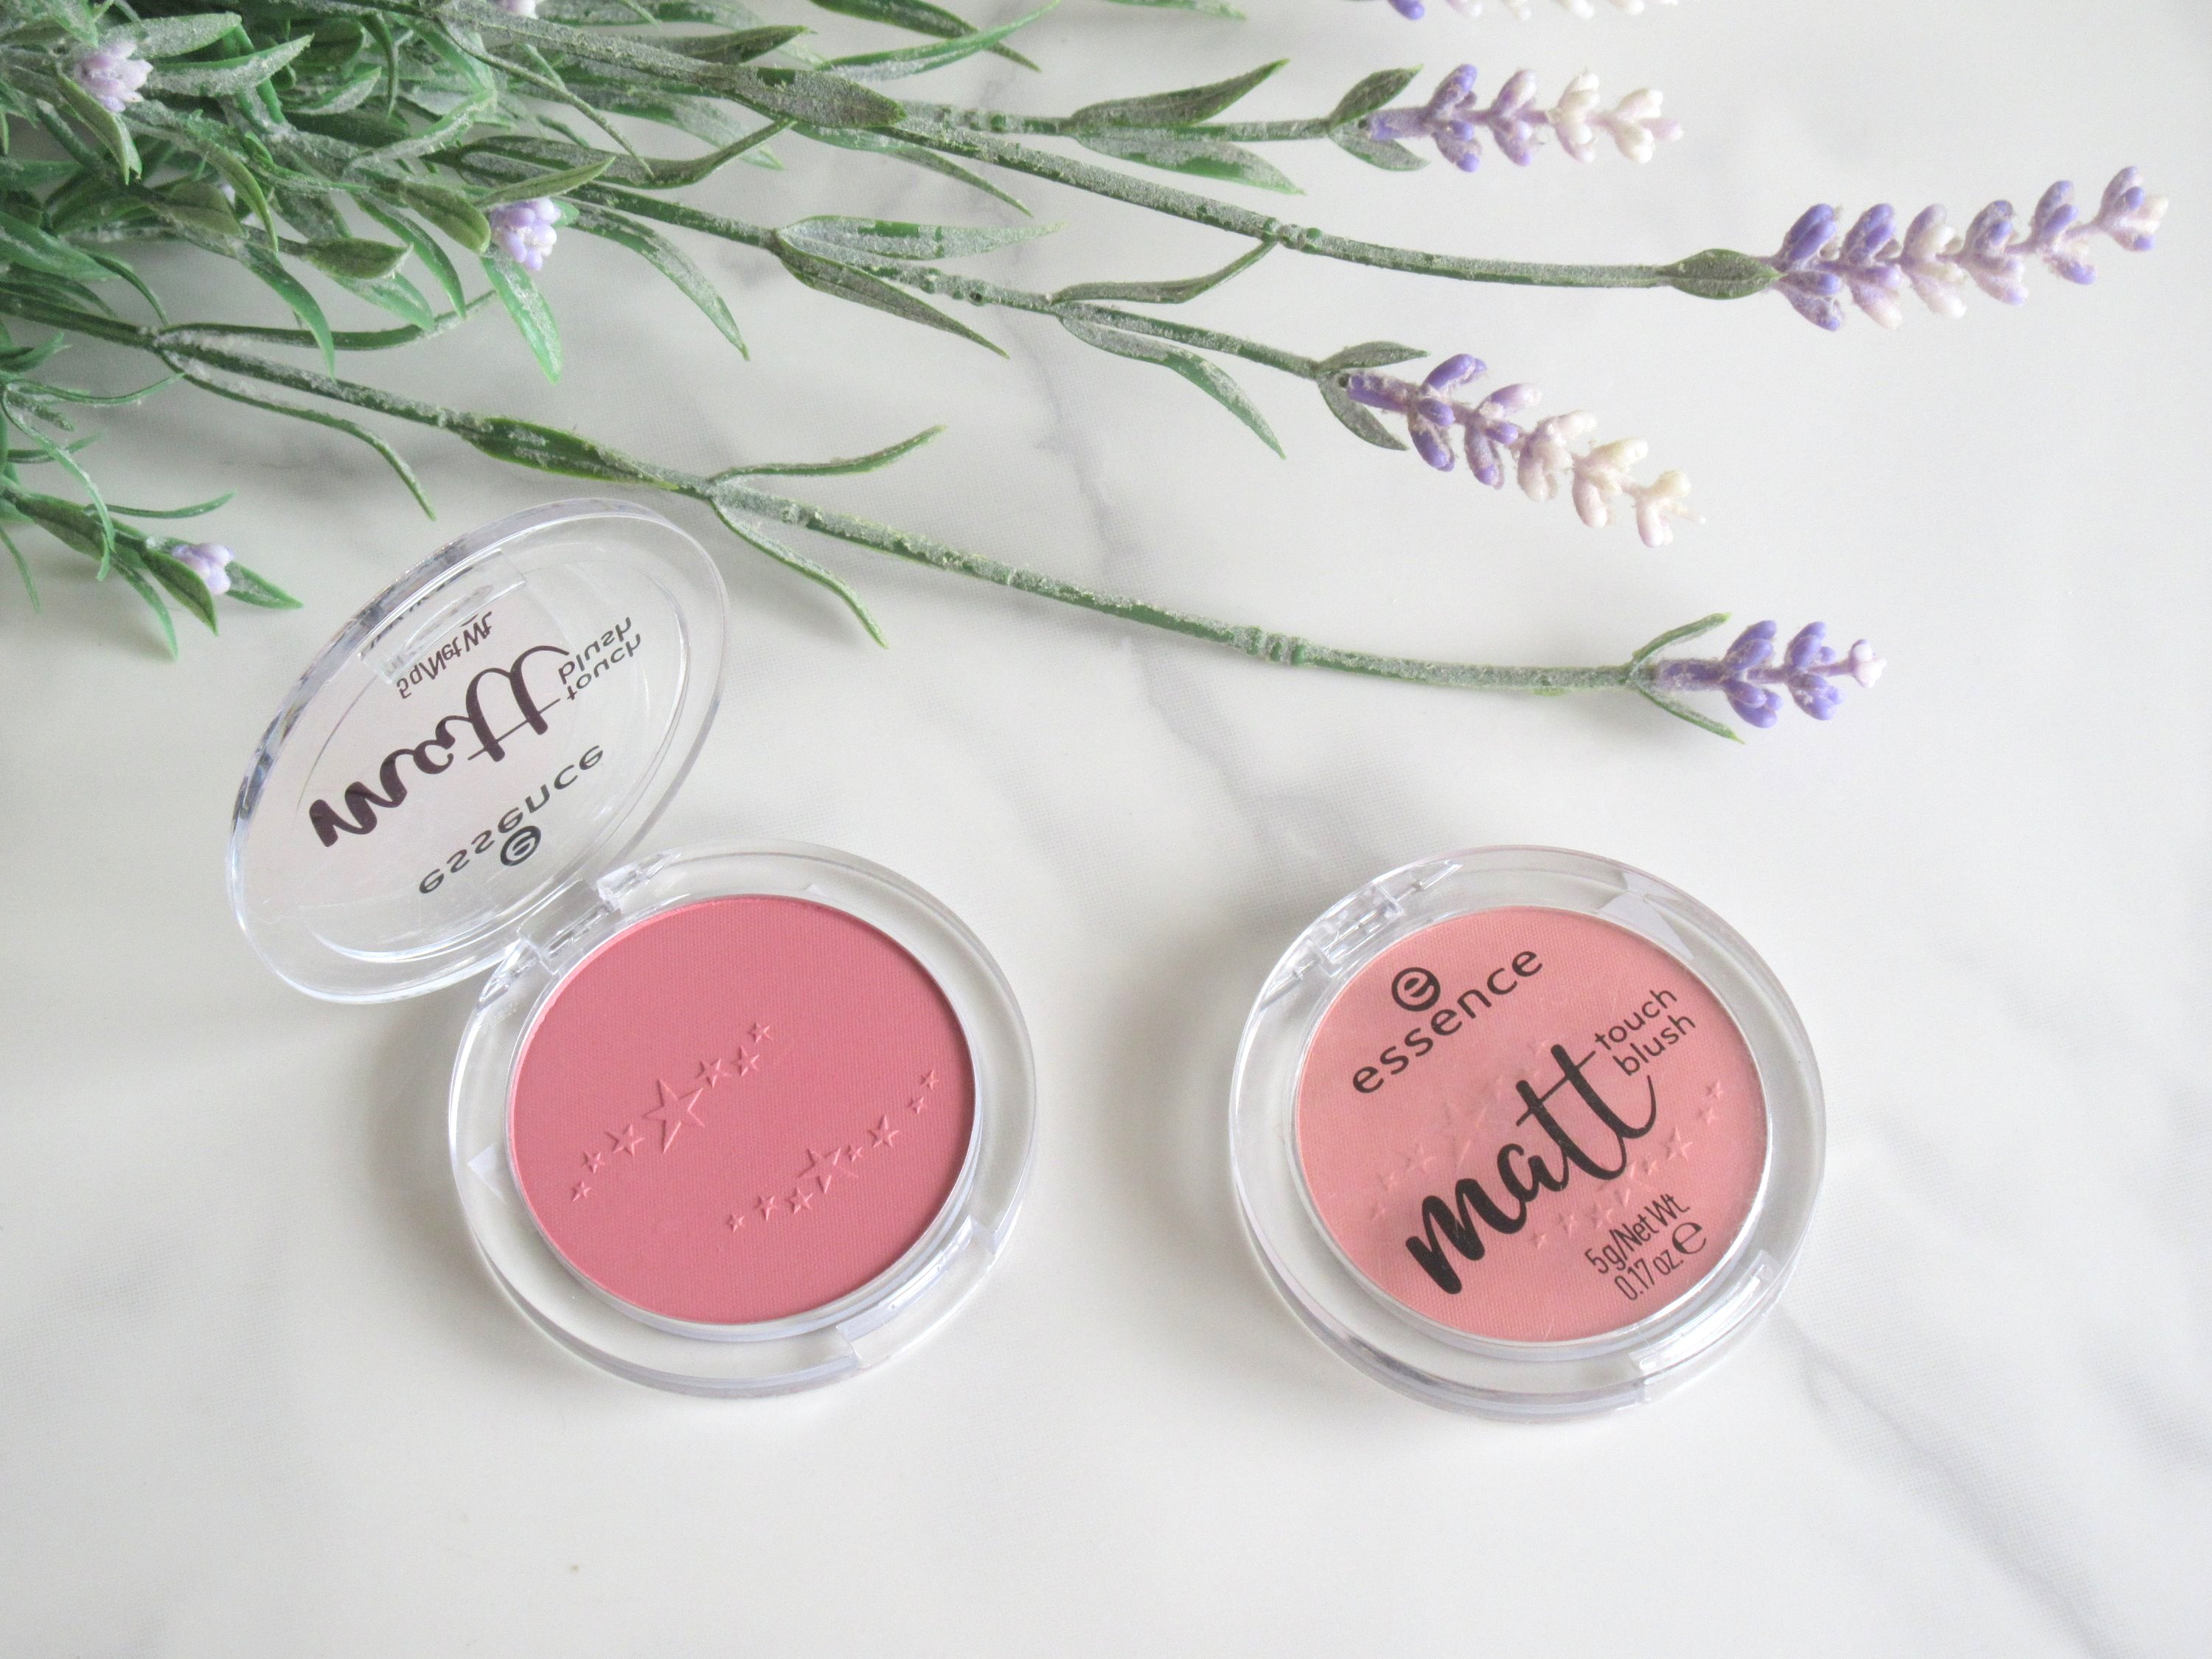 essence matt touch blush, essence matt touch blush 10 peach me up, essence matte touch blush 20 berry me up